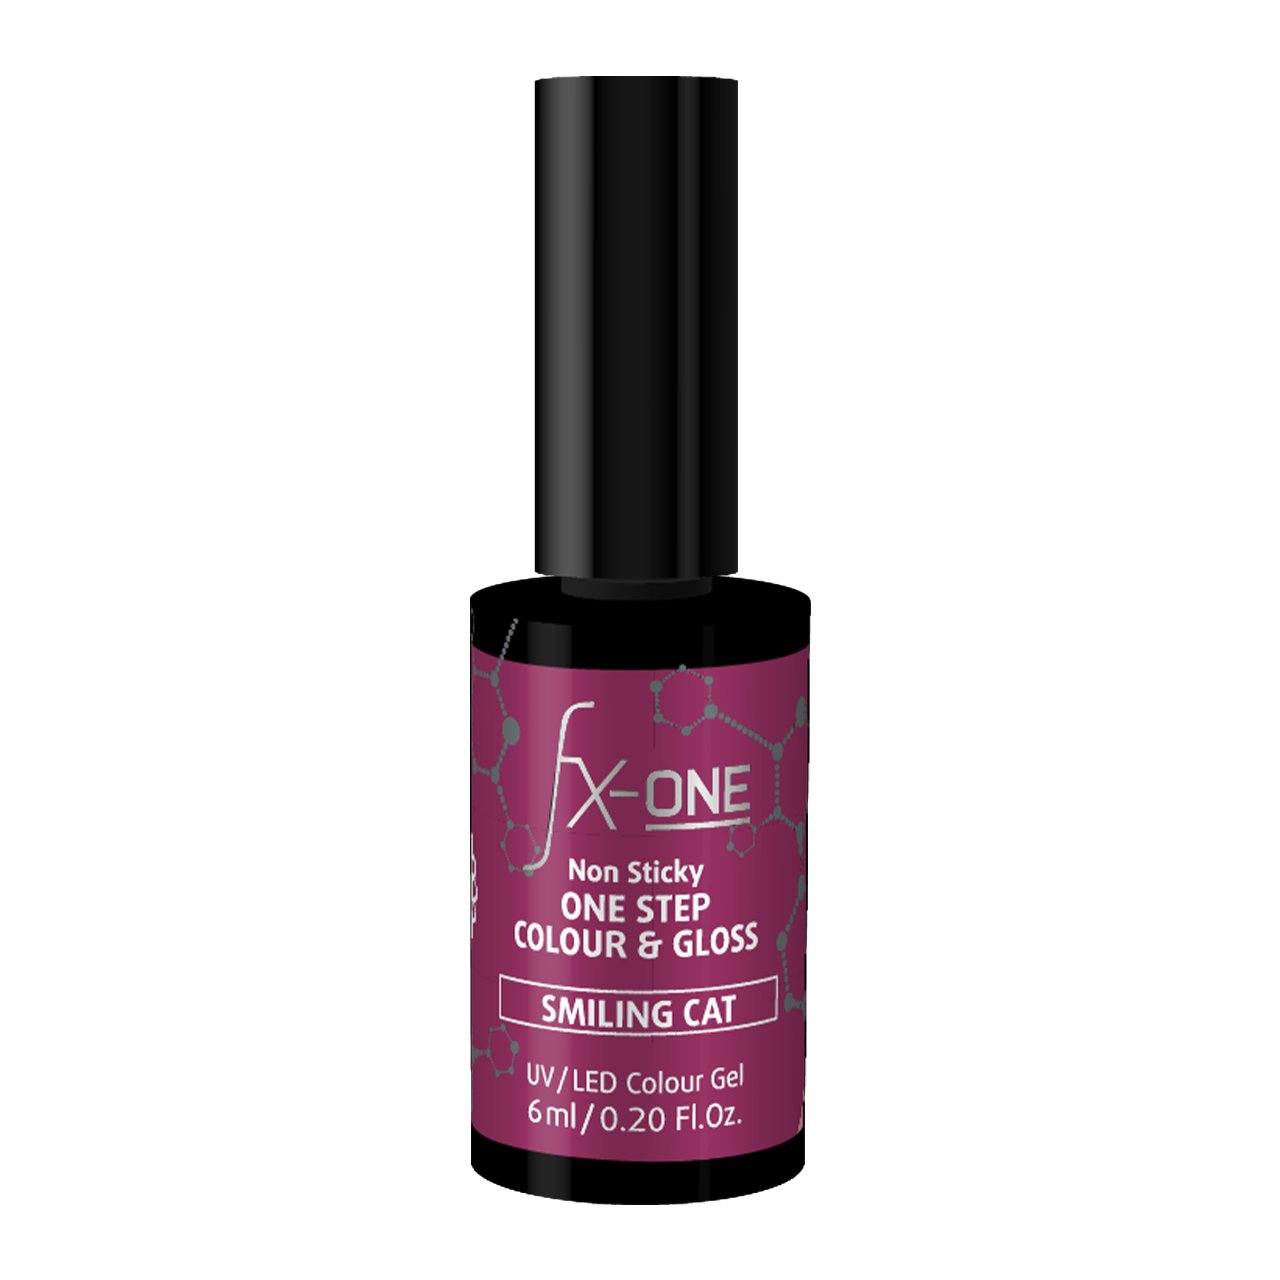 FX-ONE Colour & Gloss Smiling Cat